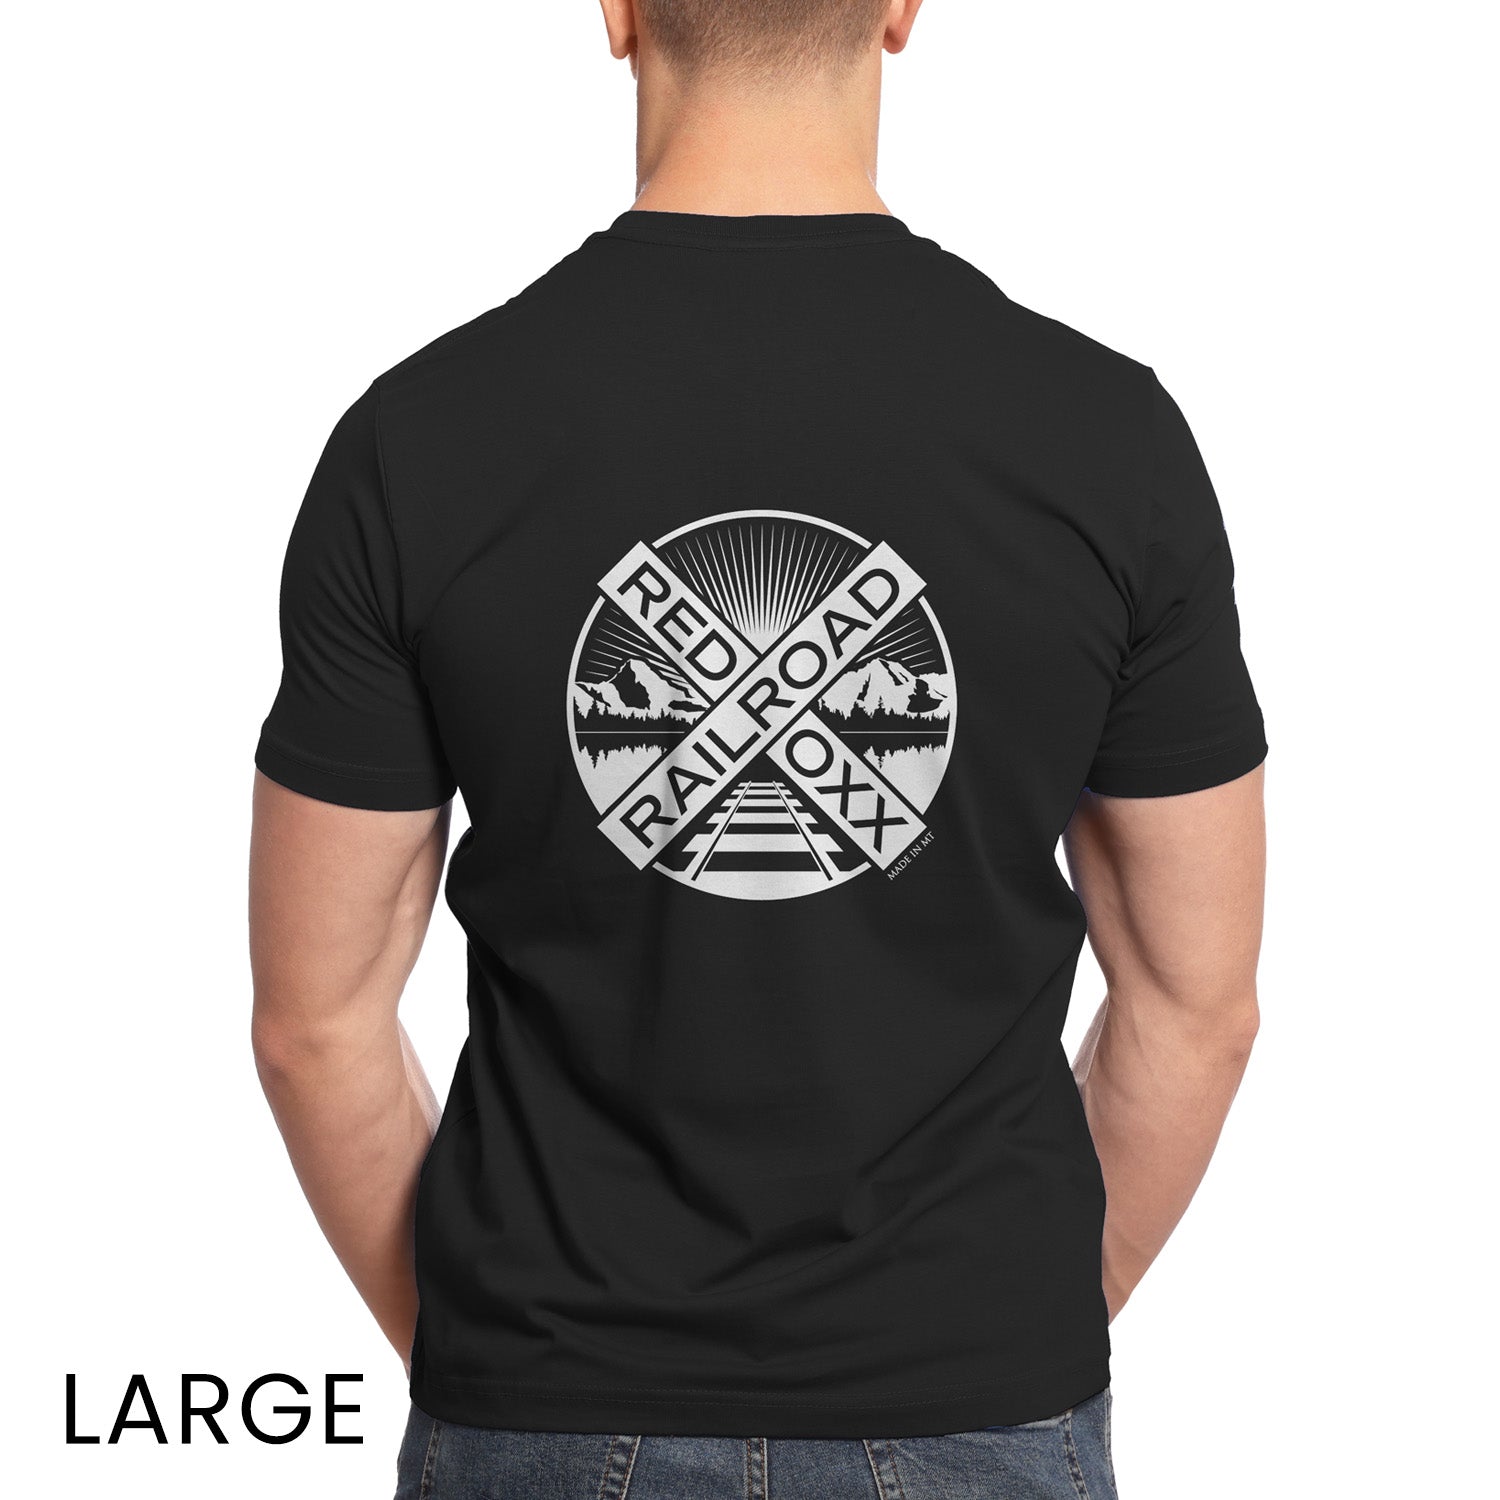 Red Oxx Railroad T-Shirt